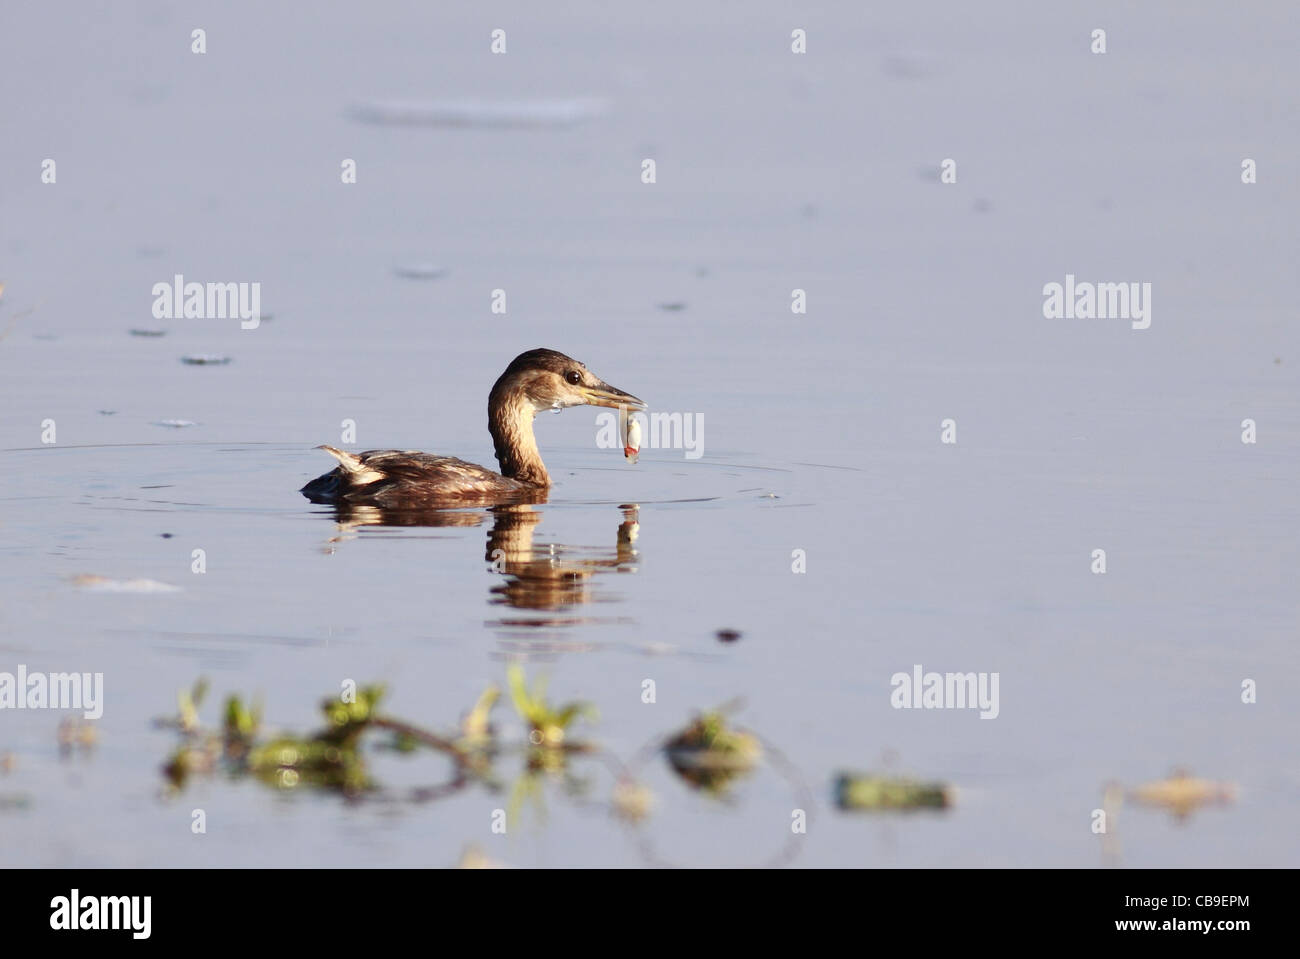 Little Grebe (Tachybaptus ruficollis) in a pond, Photographed in Israel in September Stock Photo